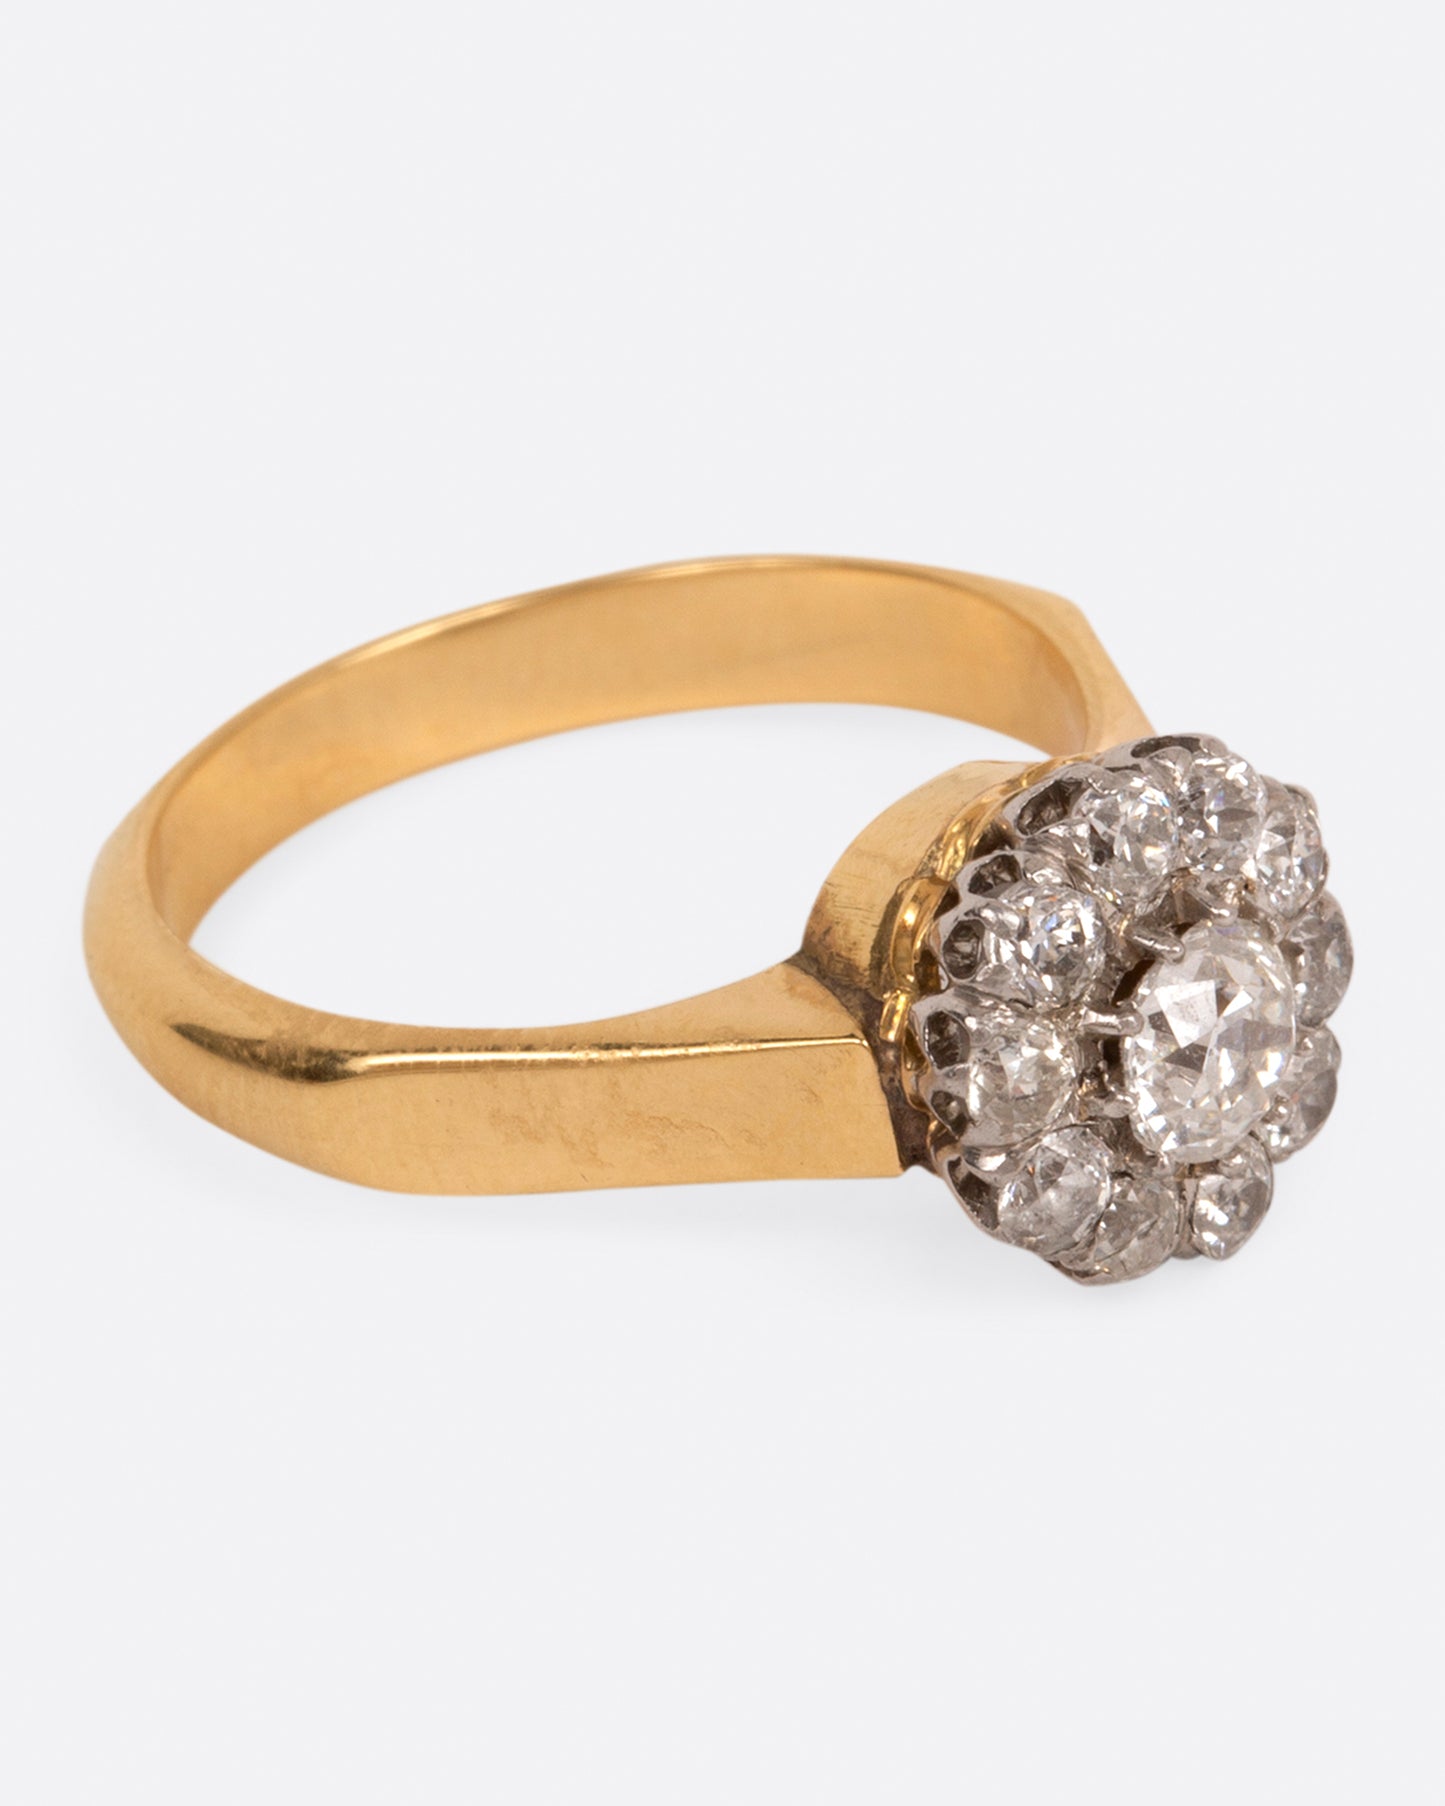 A wide flat yellow gold ring with a flower-shaped cluster of diamonds, shown from the side.